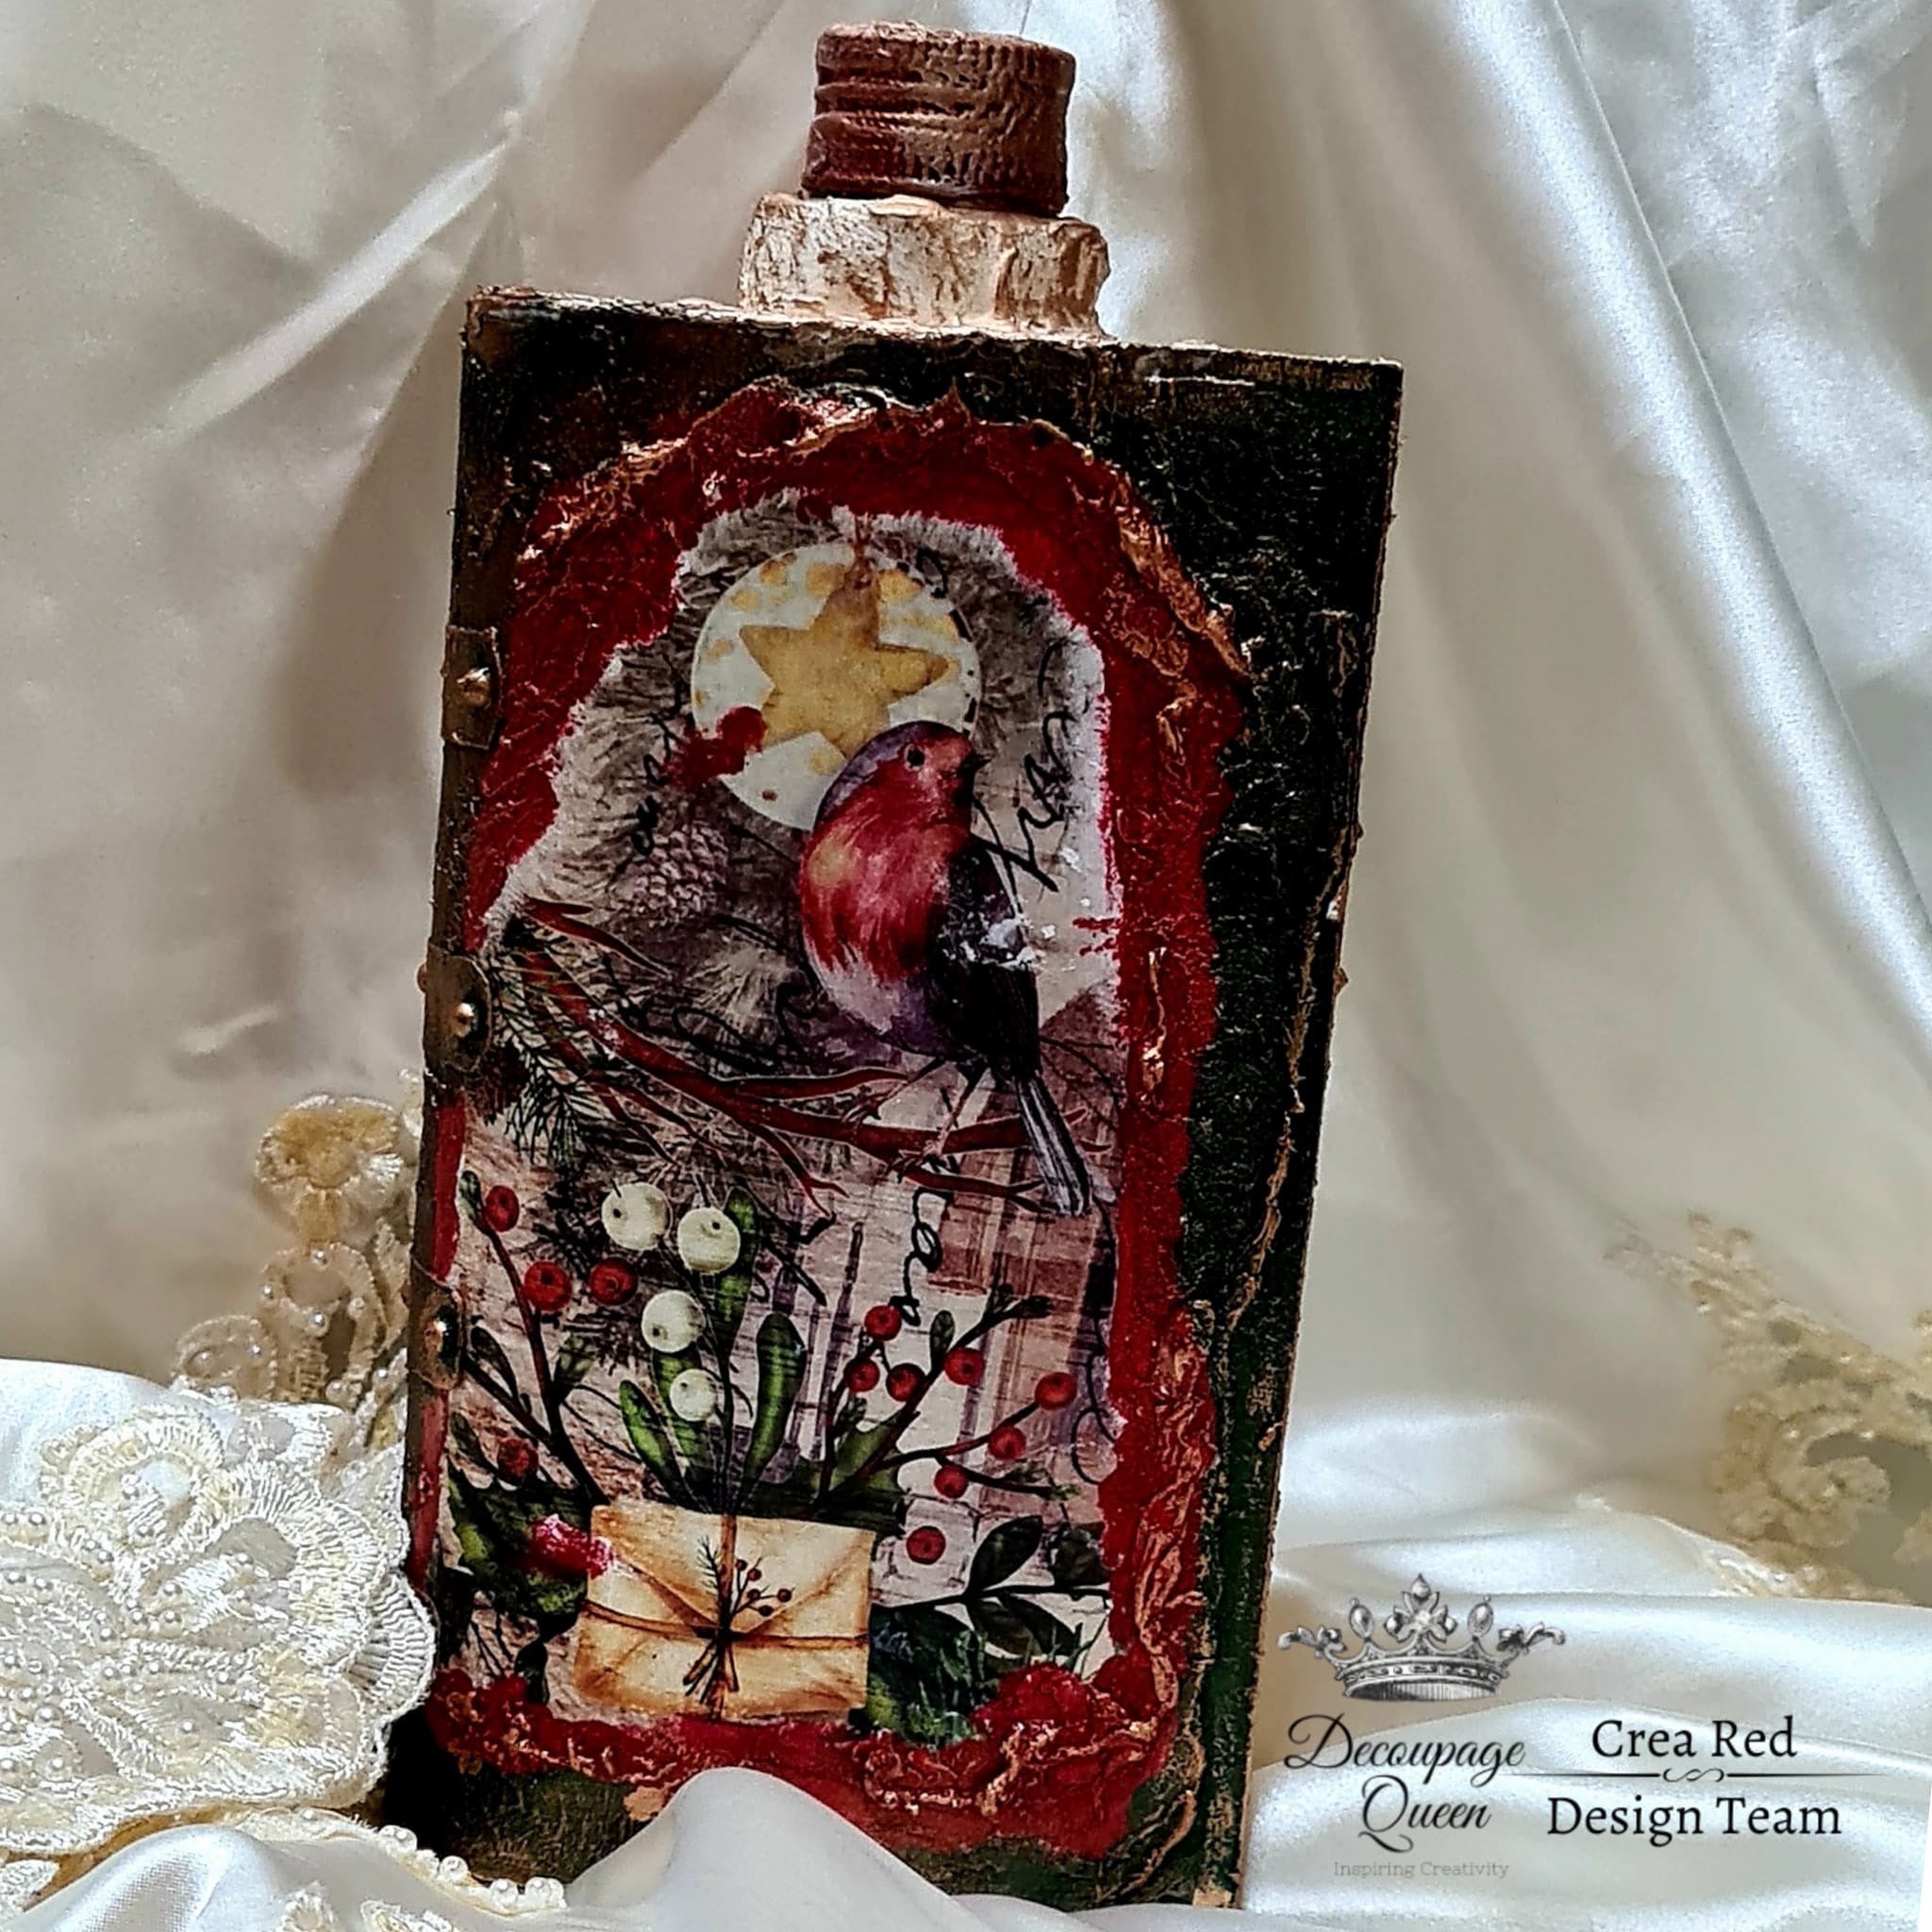 A decor flask with the Festive Robins decoupage paper on top. A black Decoupage Queen and Crea Red Design Team logo on the bottom right.